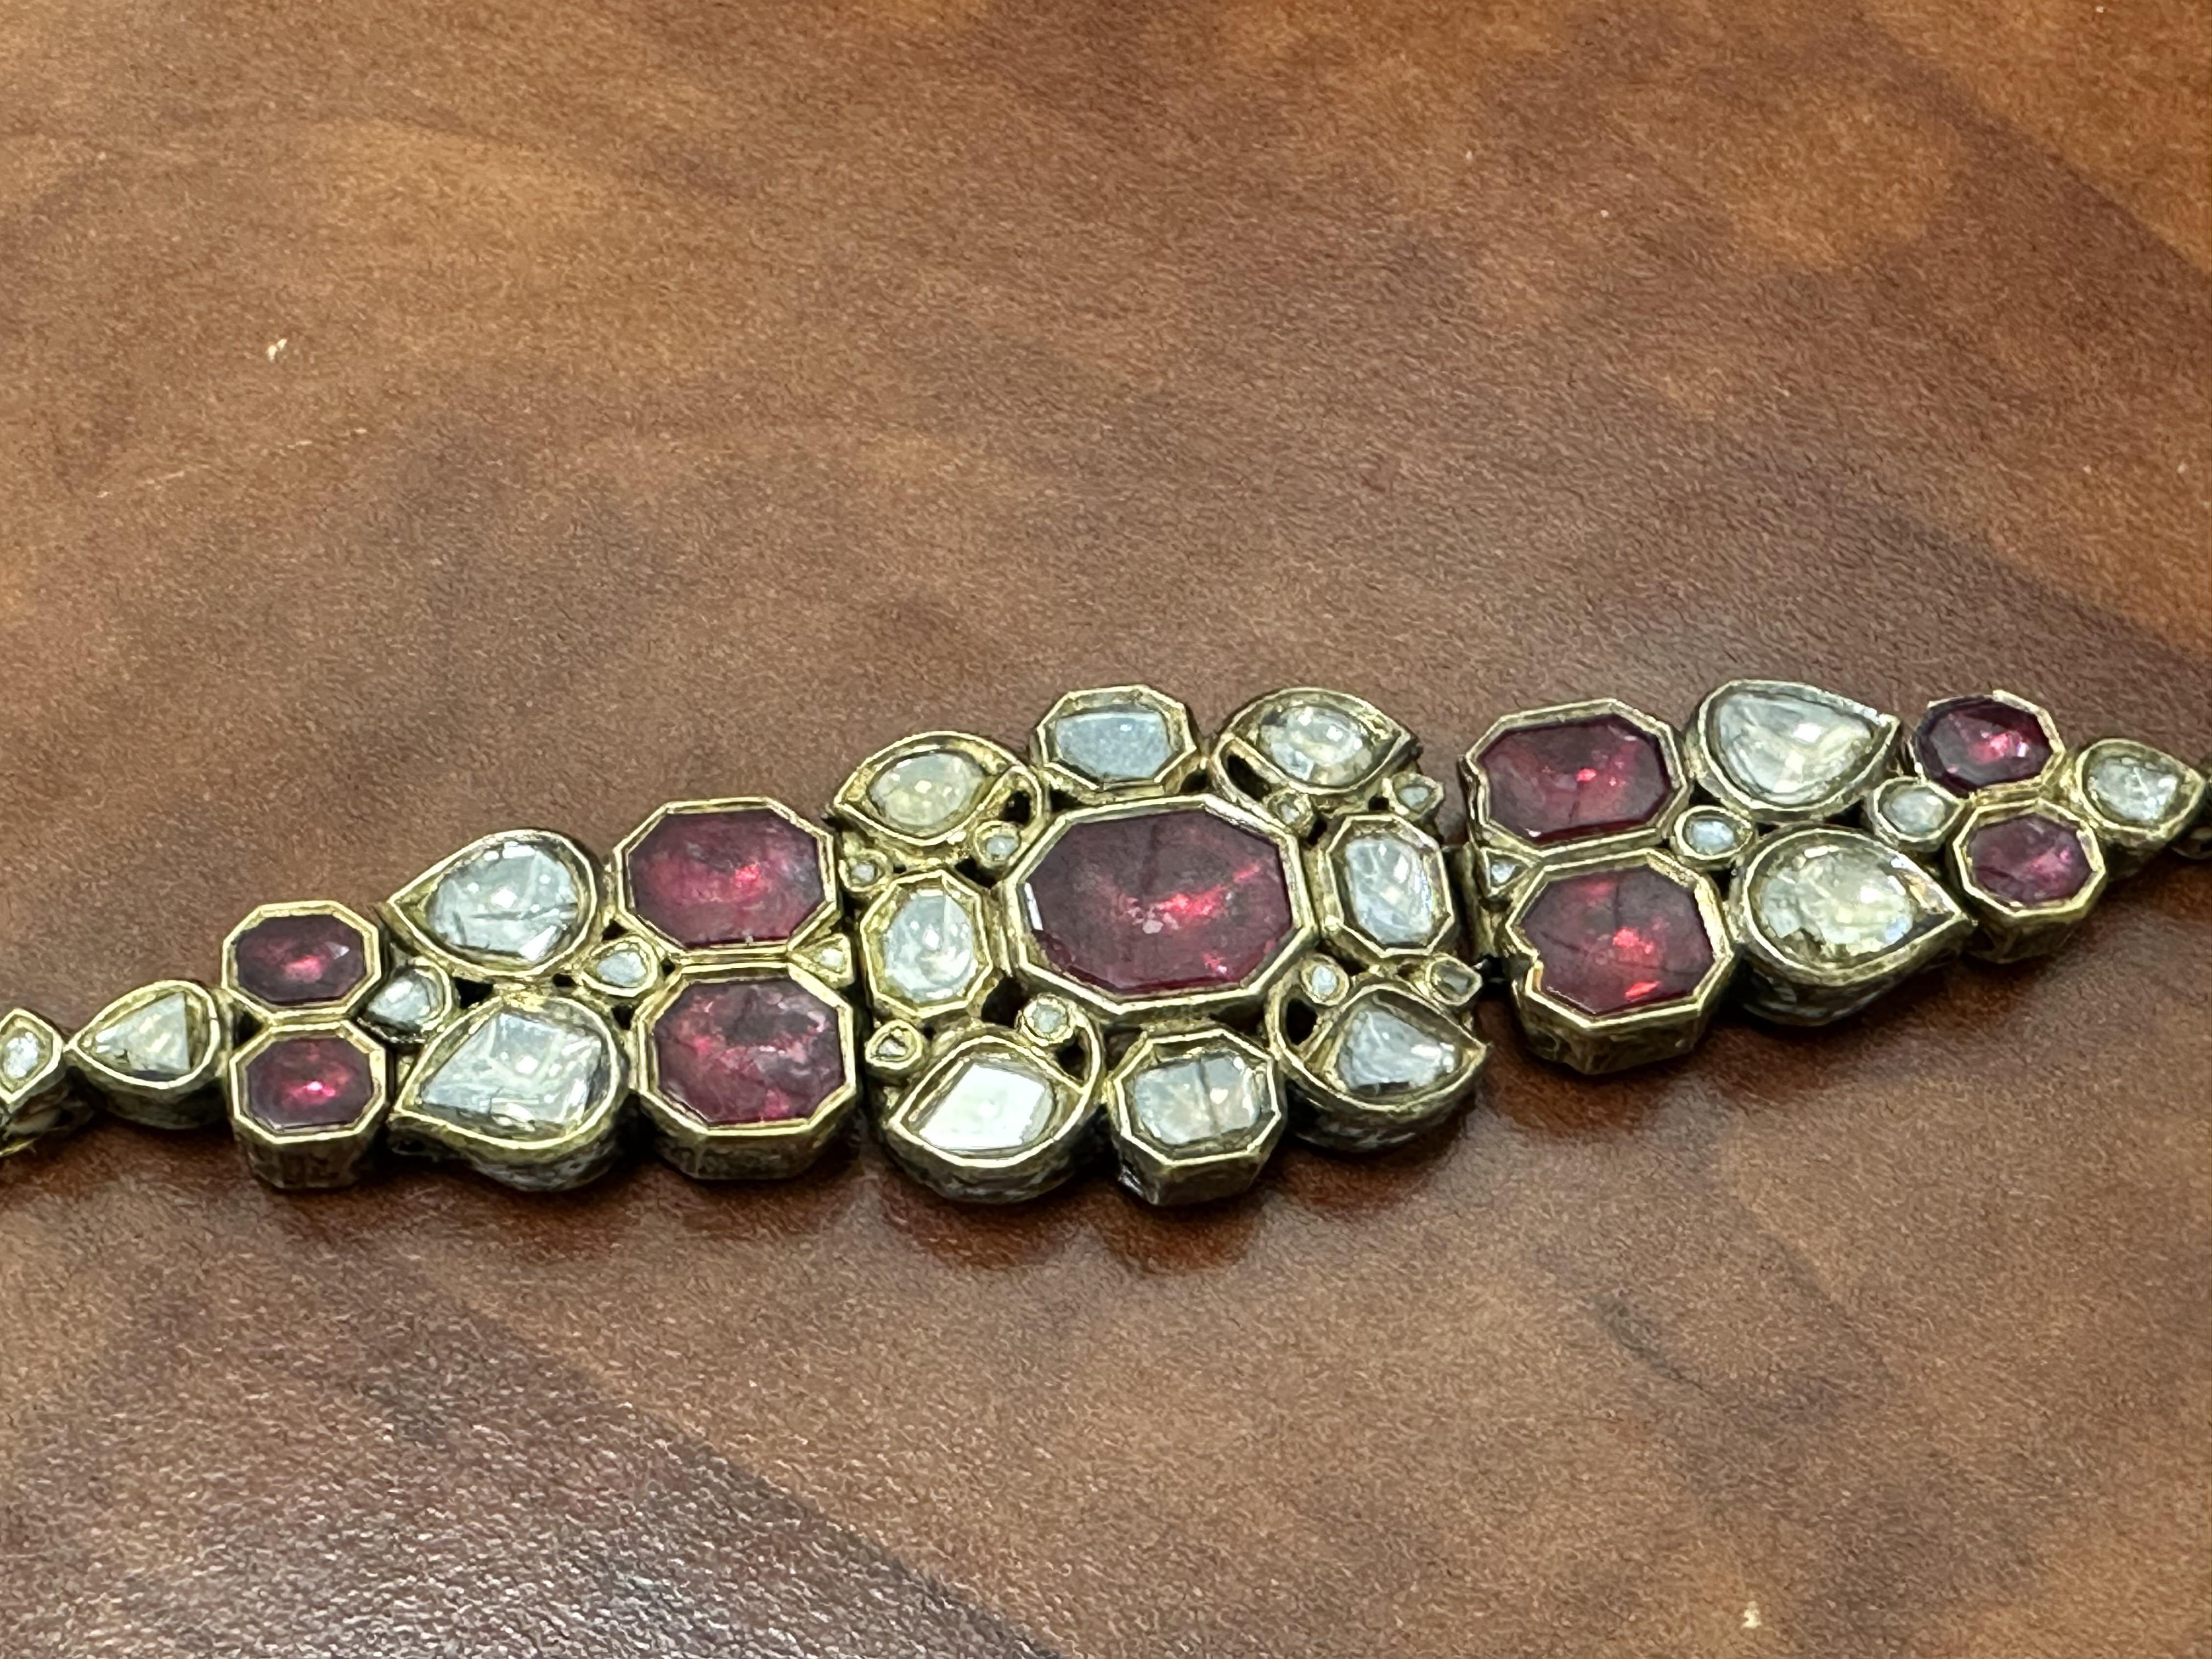 Historical Artifacts - 19th Century gold and diamond bracelet, most likely from India u/Santa_Hates_You